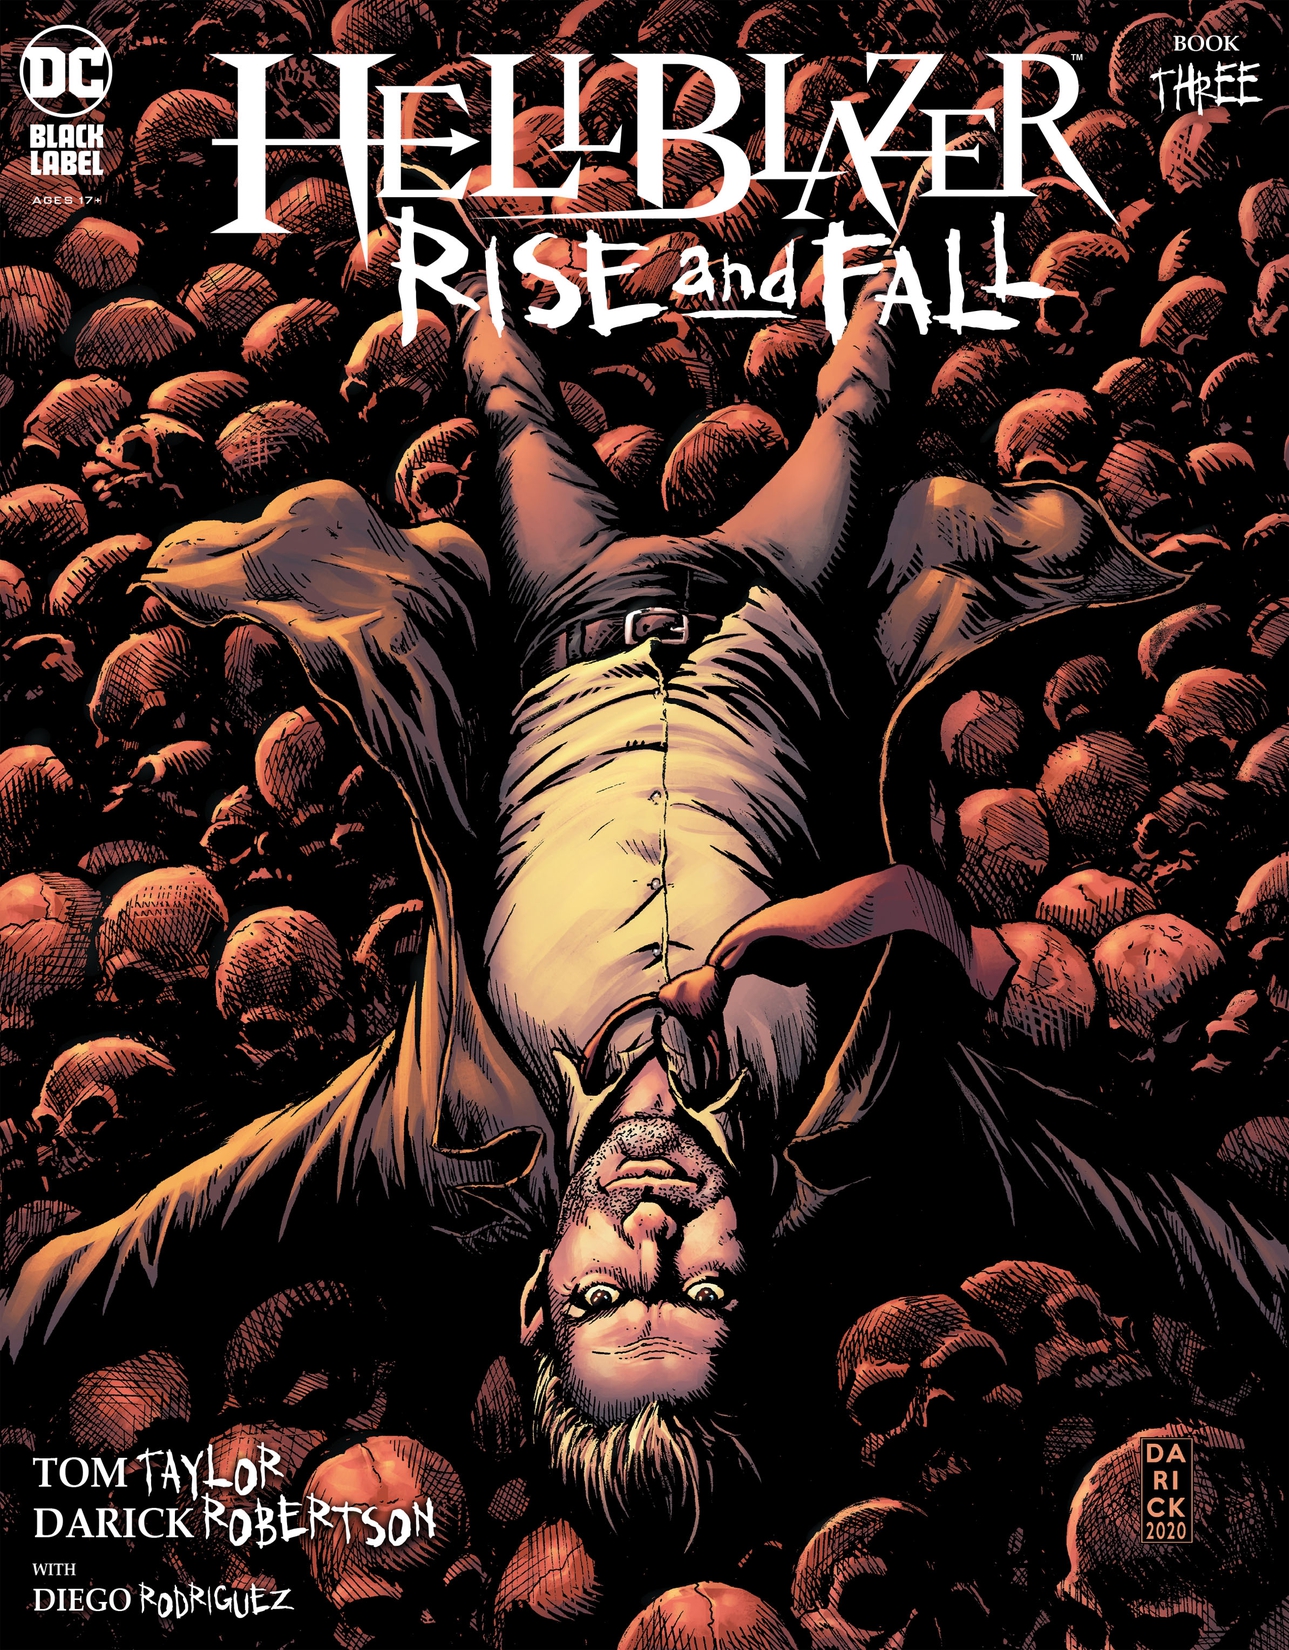 Hellblazer: Rise and Fall #3 preview images